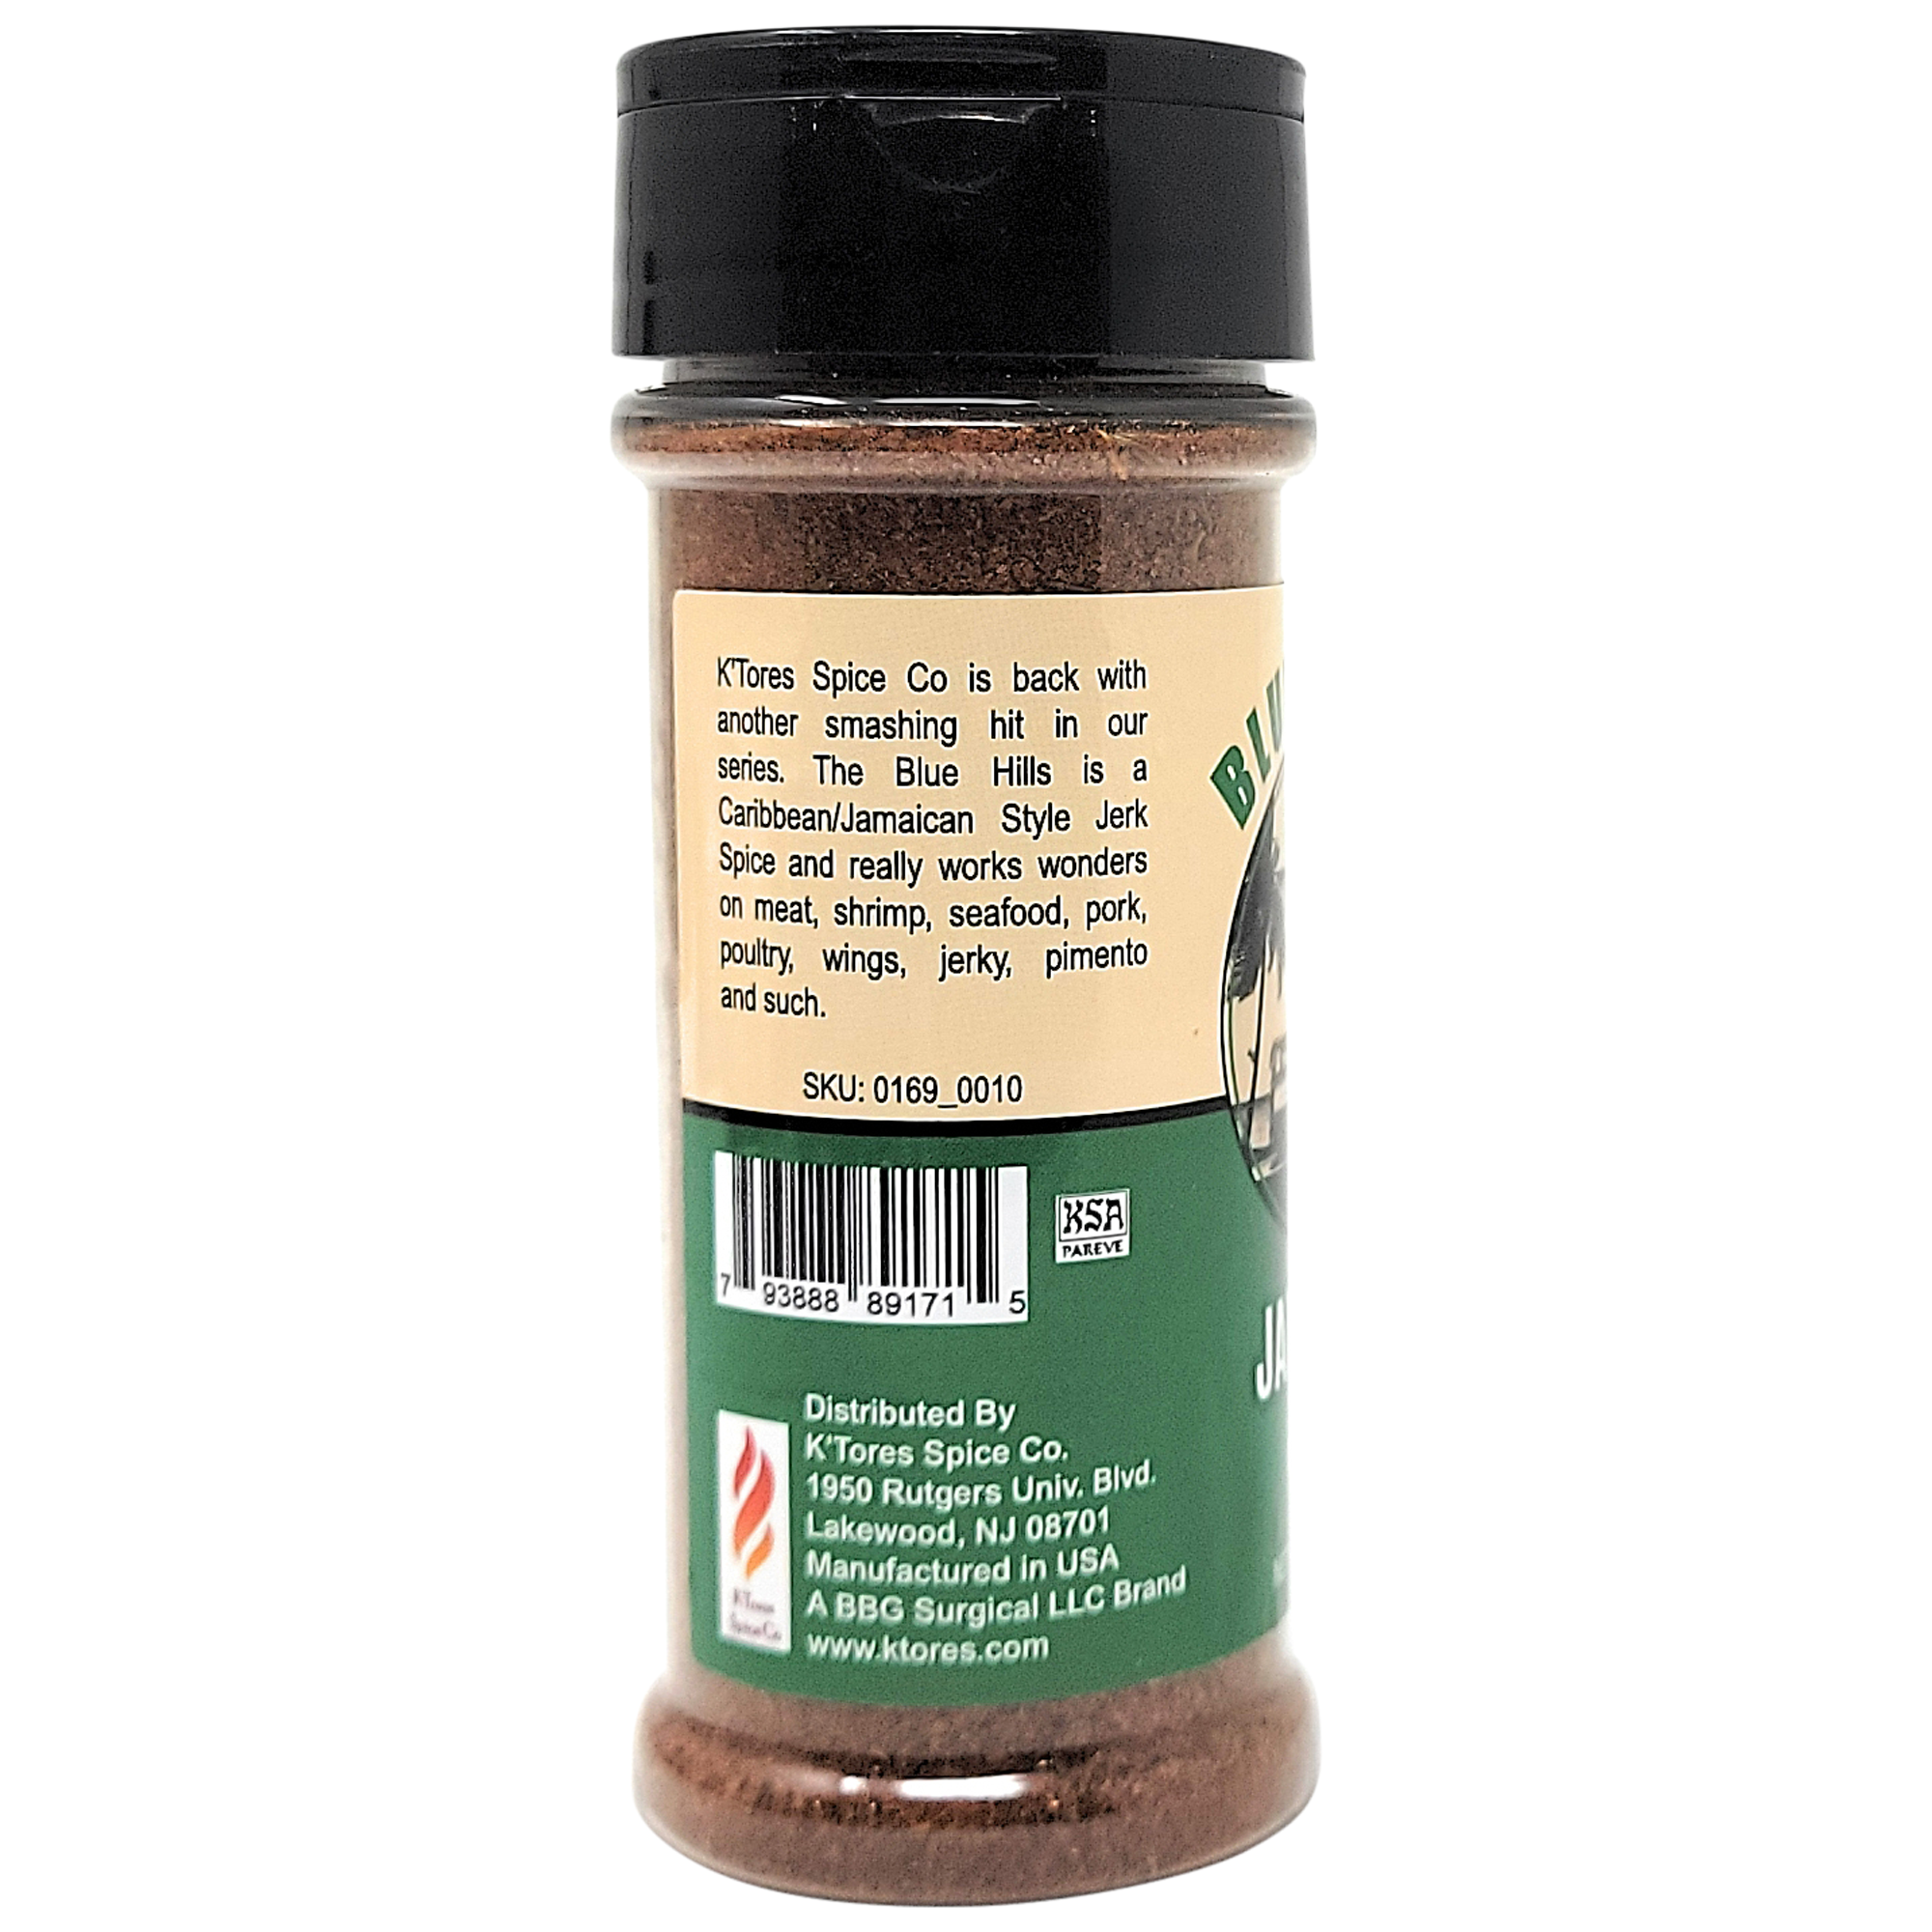 K'TORES SPICE CO Blue Hills Jamaican Jer...icken, Poultry, Turkey and More